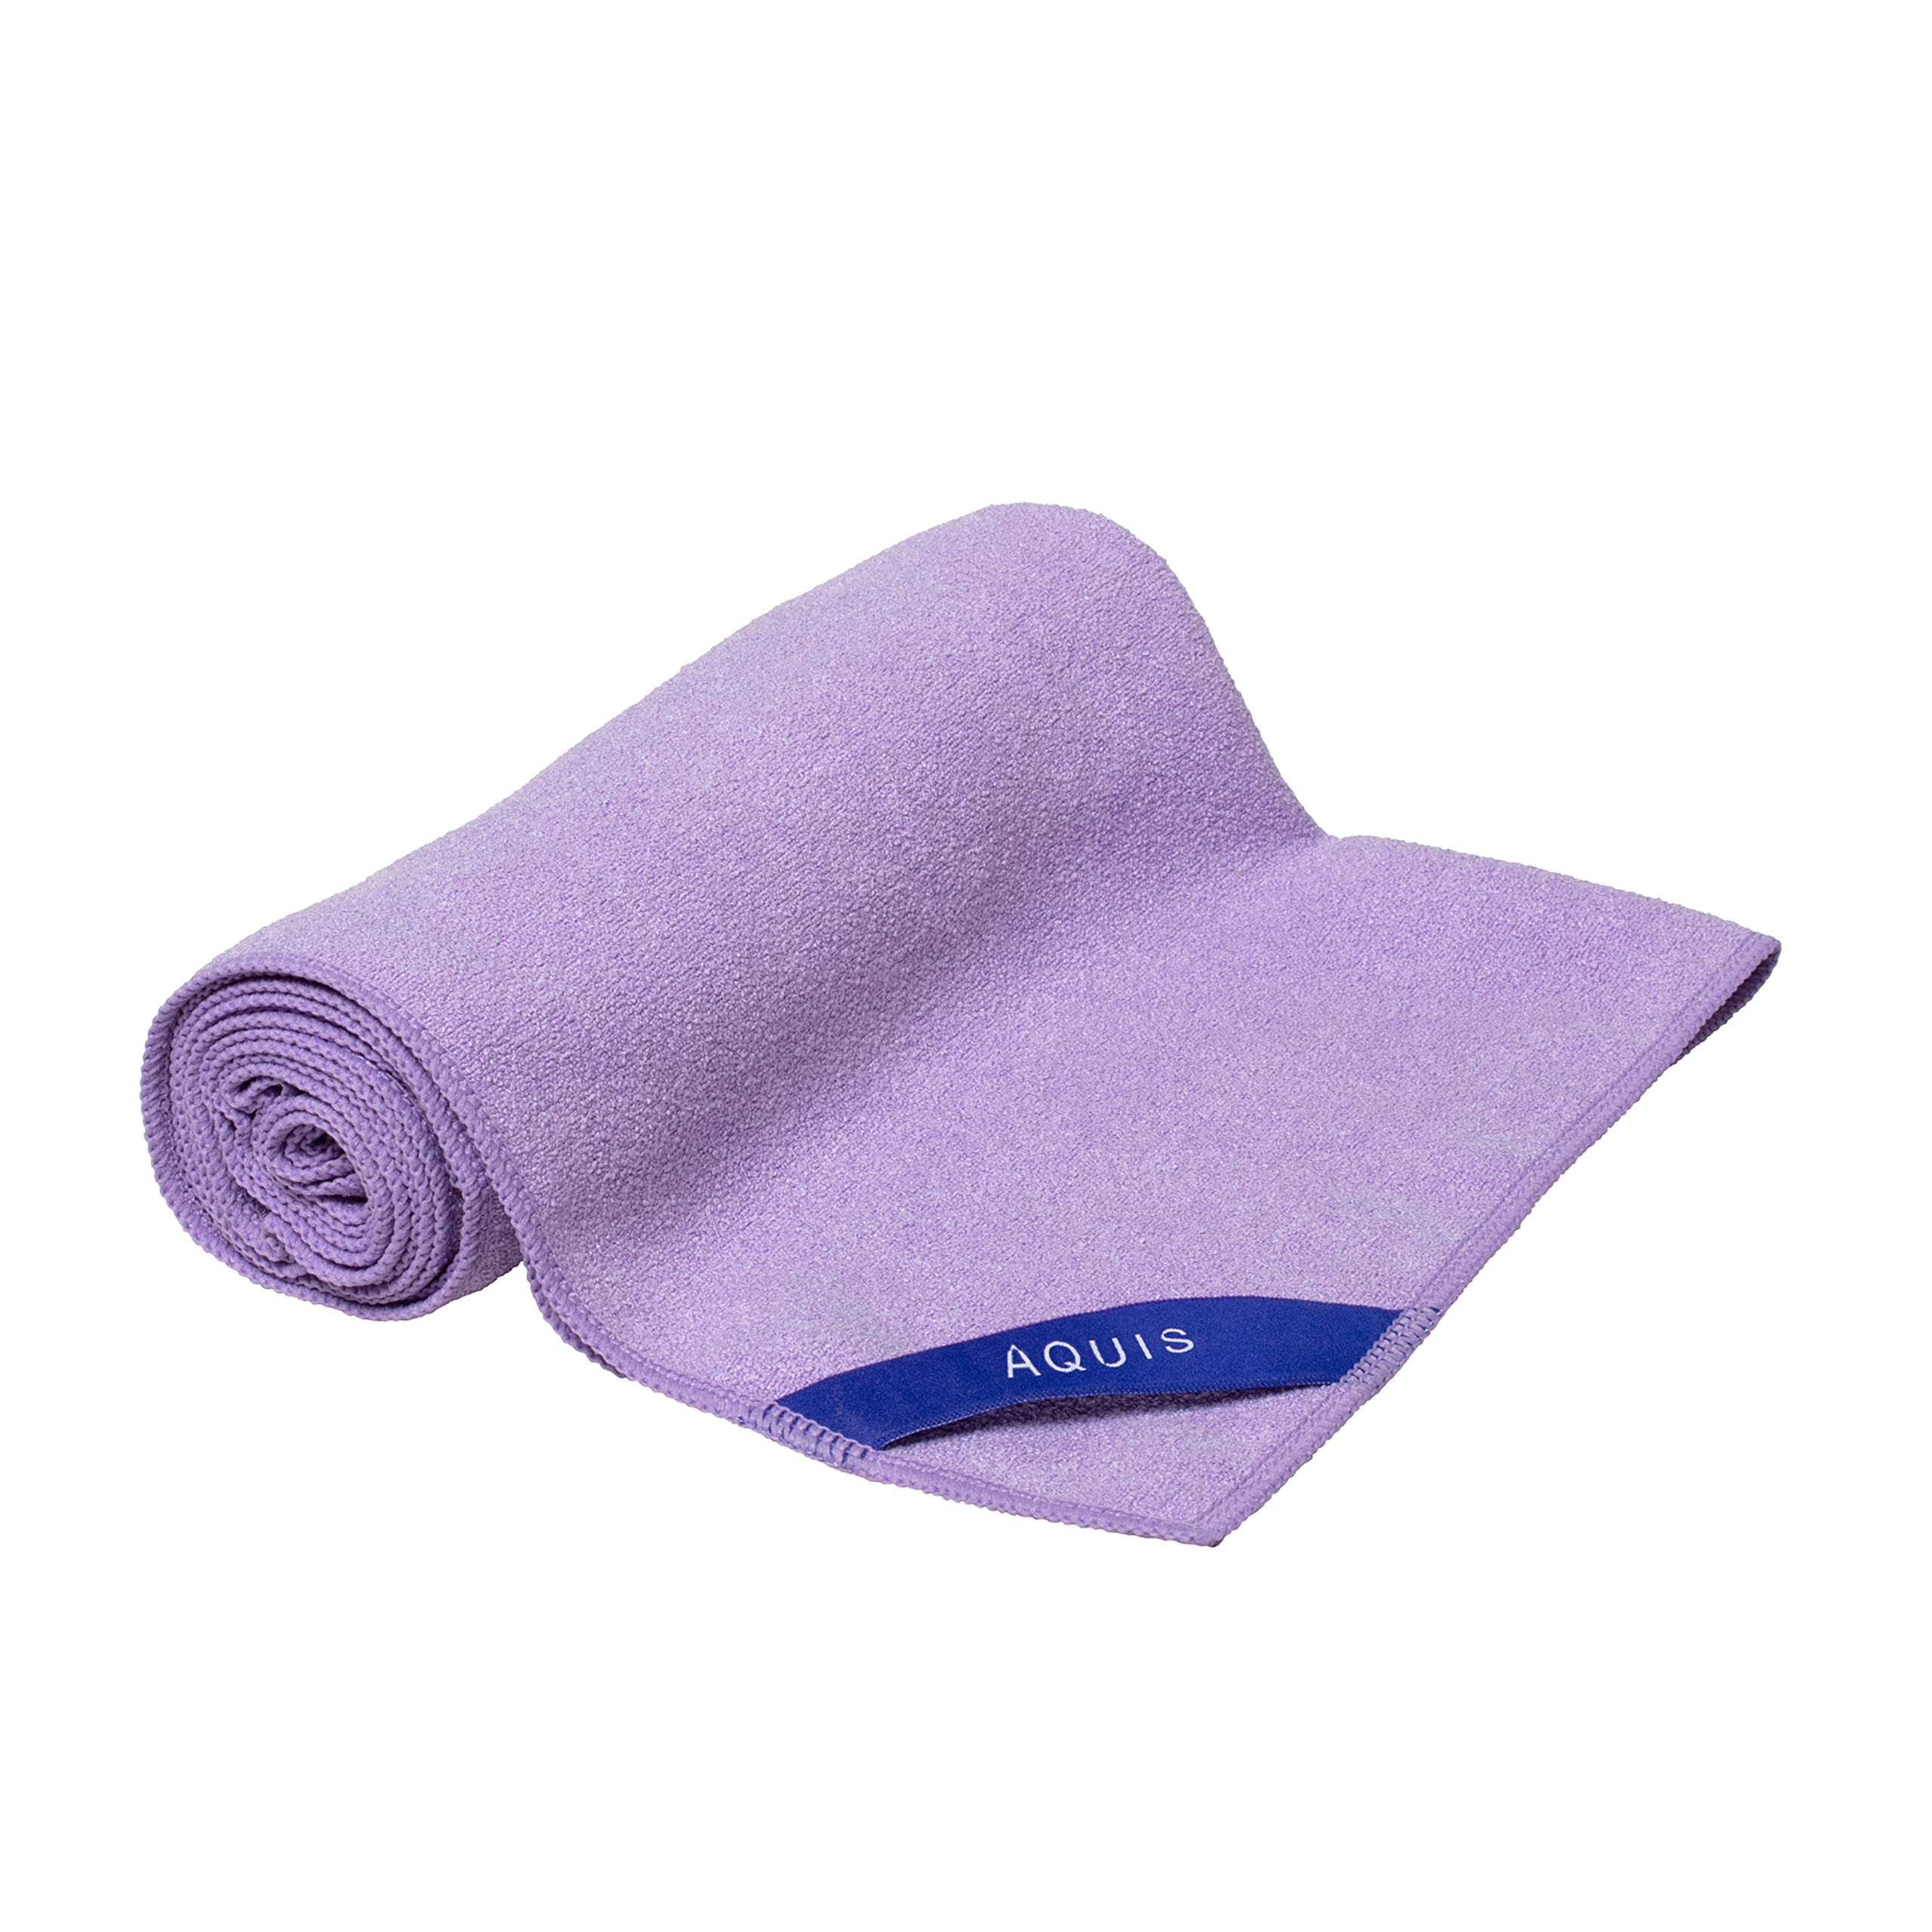 AQUIS Towel & Wrap Hair-Drying Tool, Water-Wicking, Ultra-Absorbent Recycled Microfiber